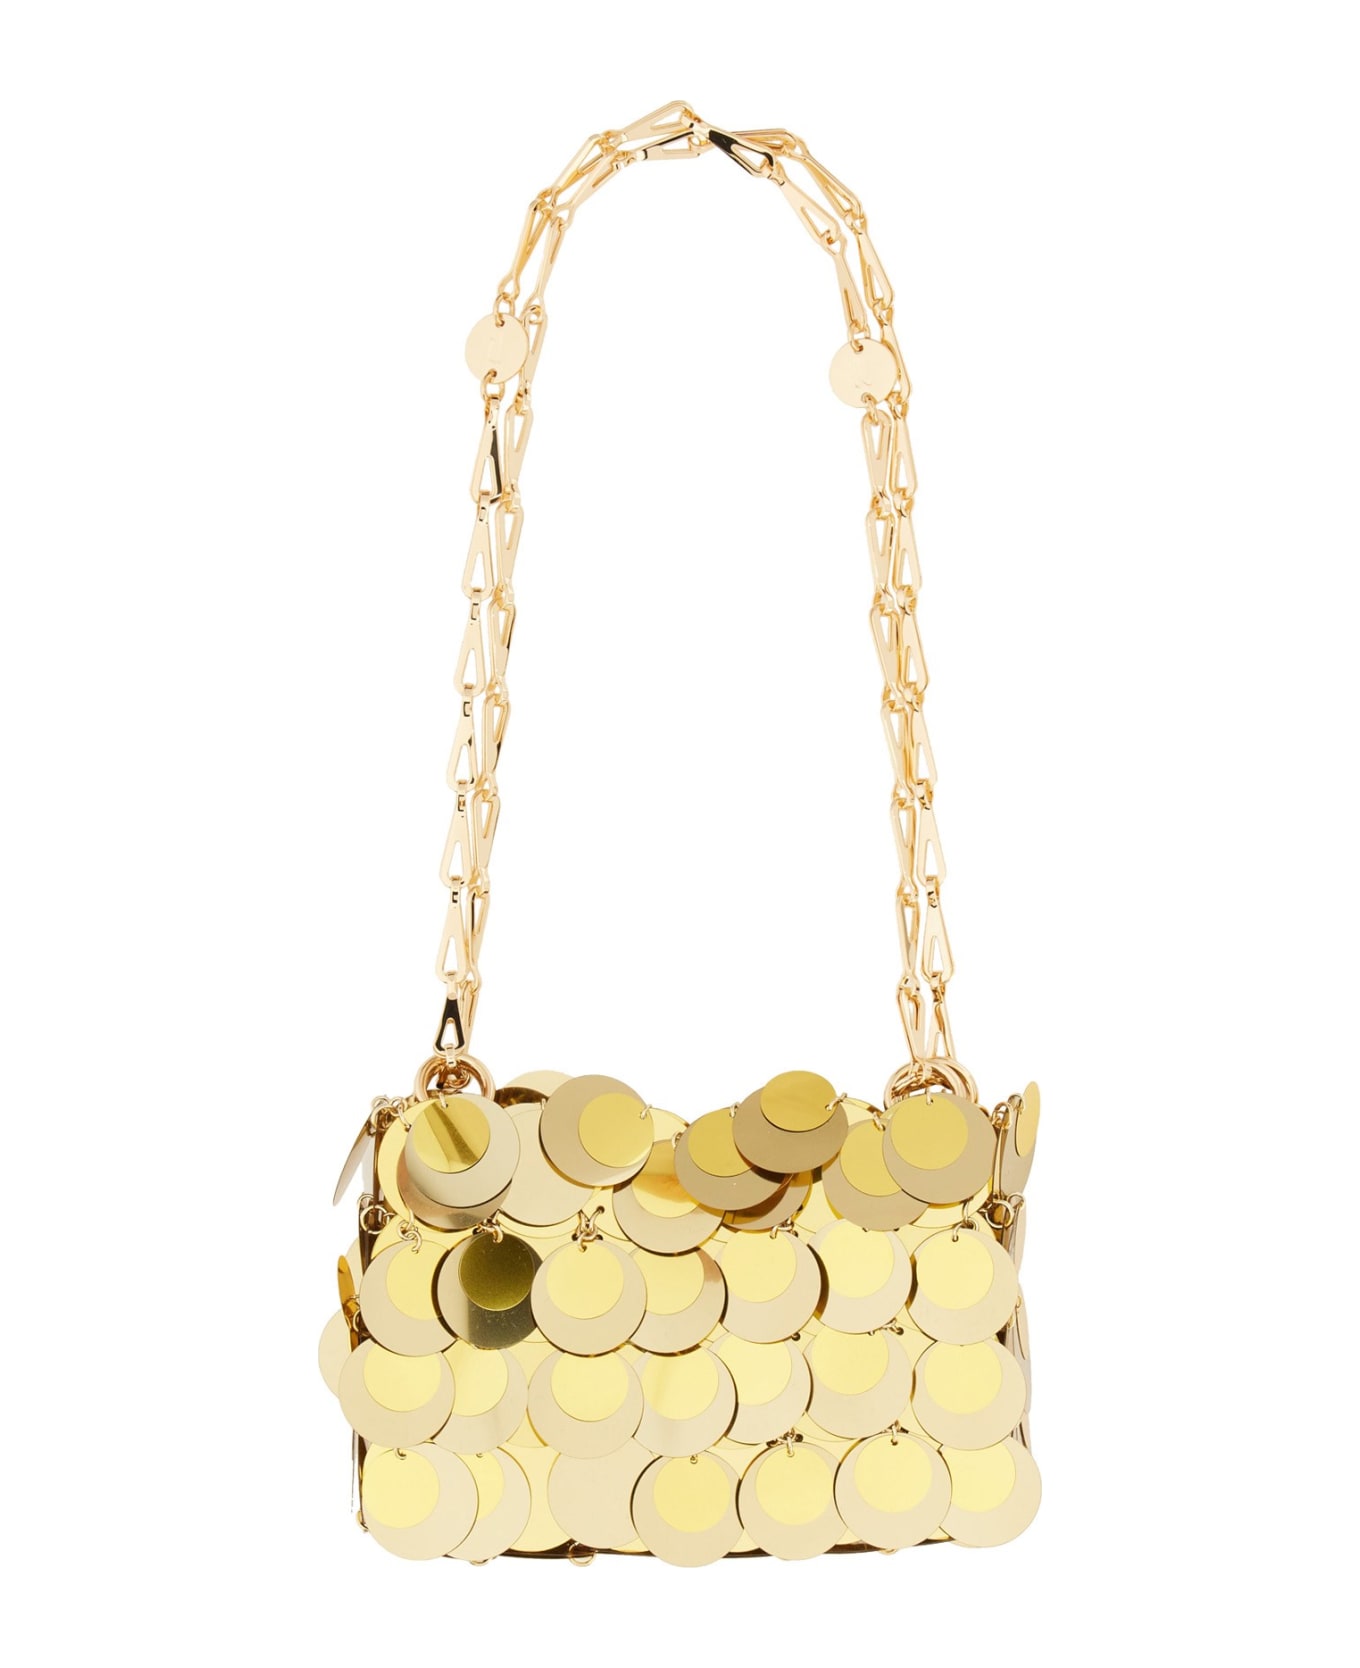 Paco Rabanne Iconic 1969 Sparkle Discs Nano Bag In Gold - Gold ショルダーバッグ